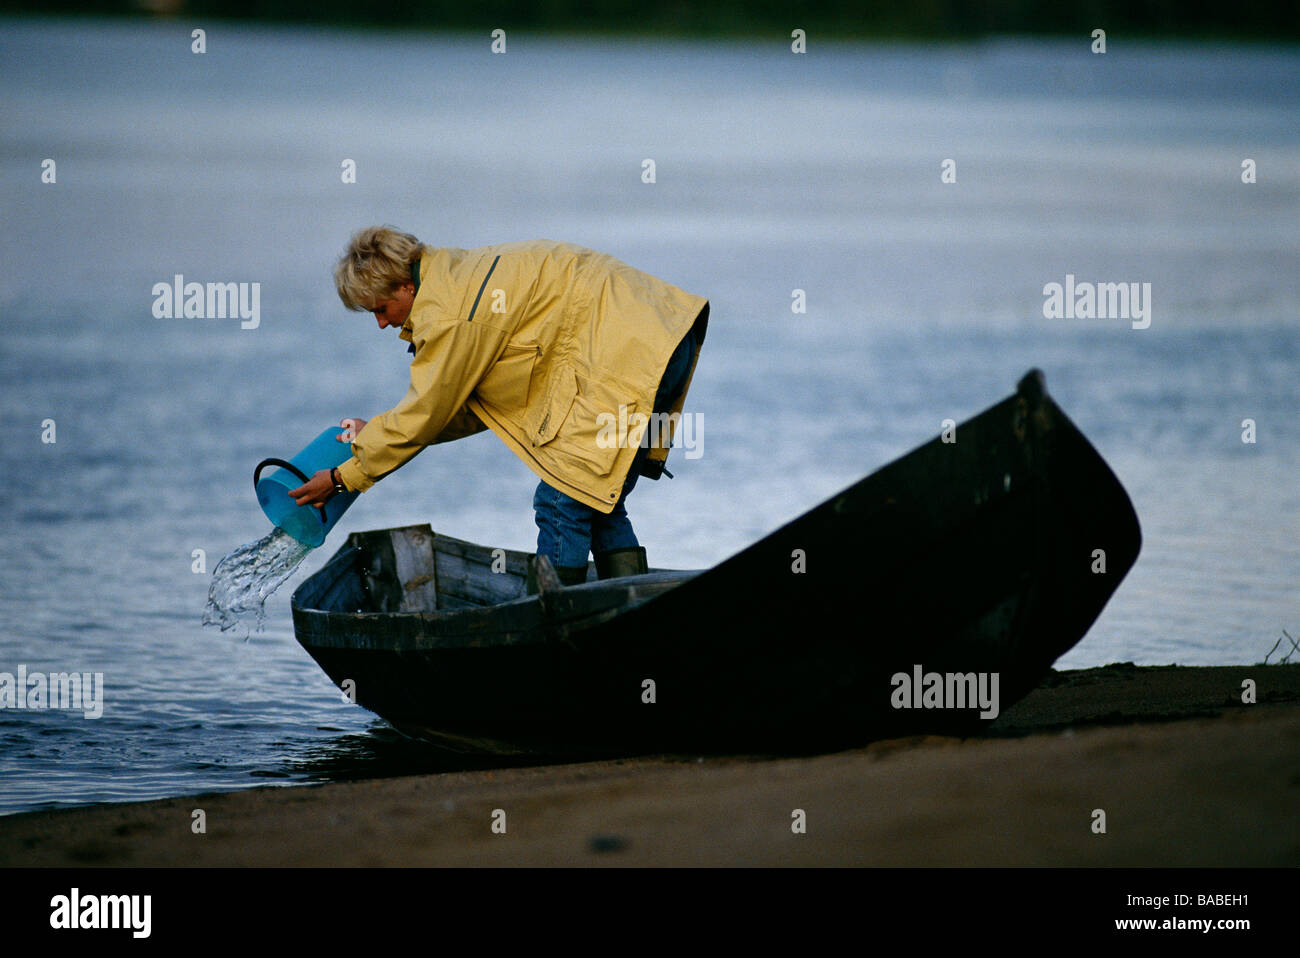 Woman bailing a boat Torne alv Sweden Stock Photo